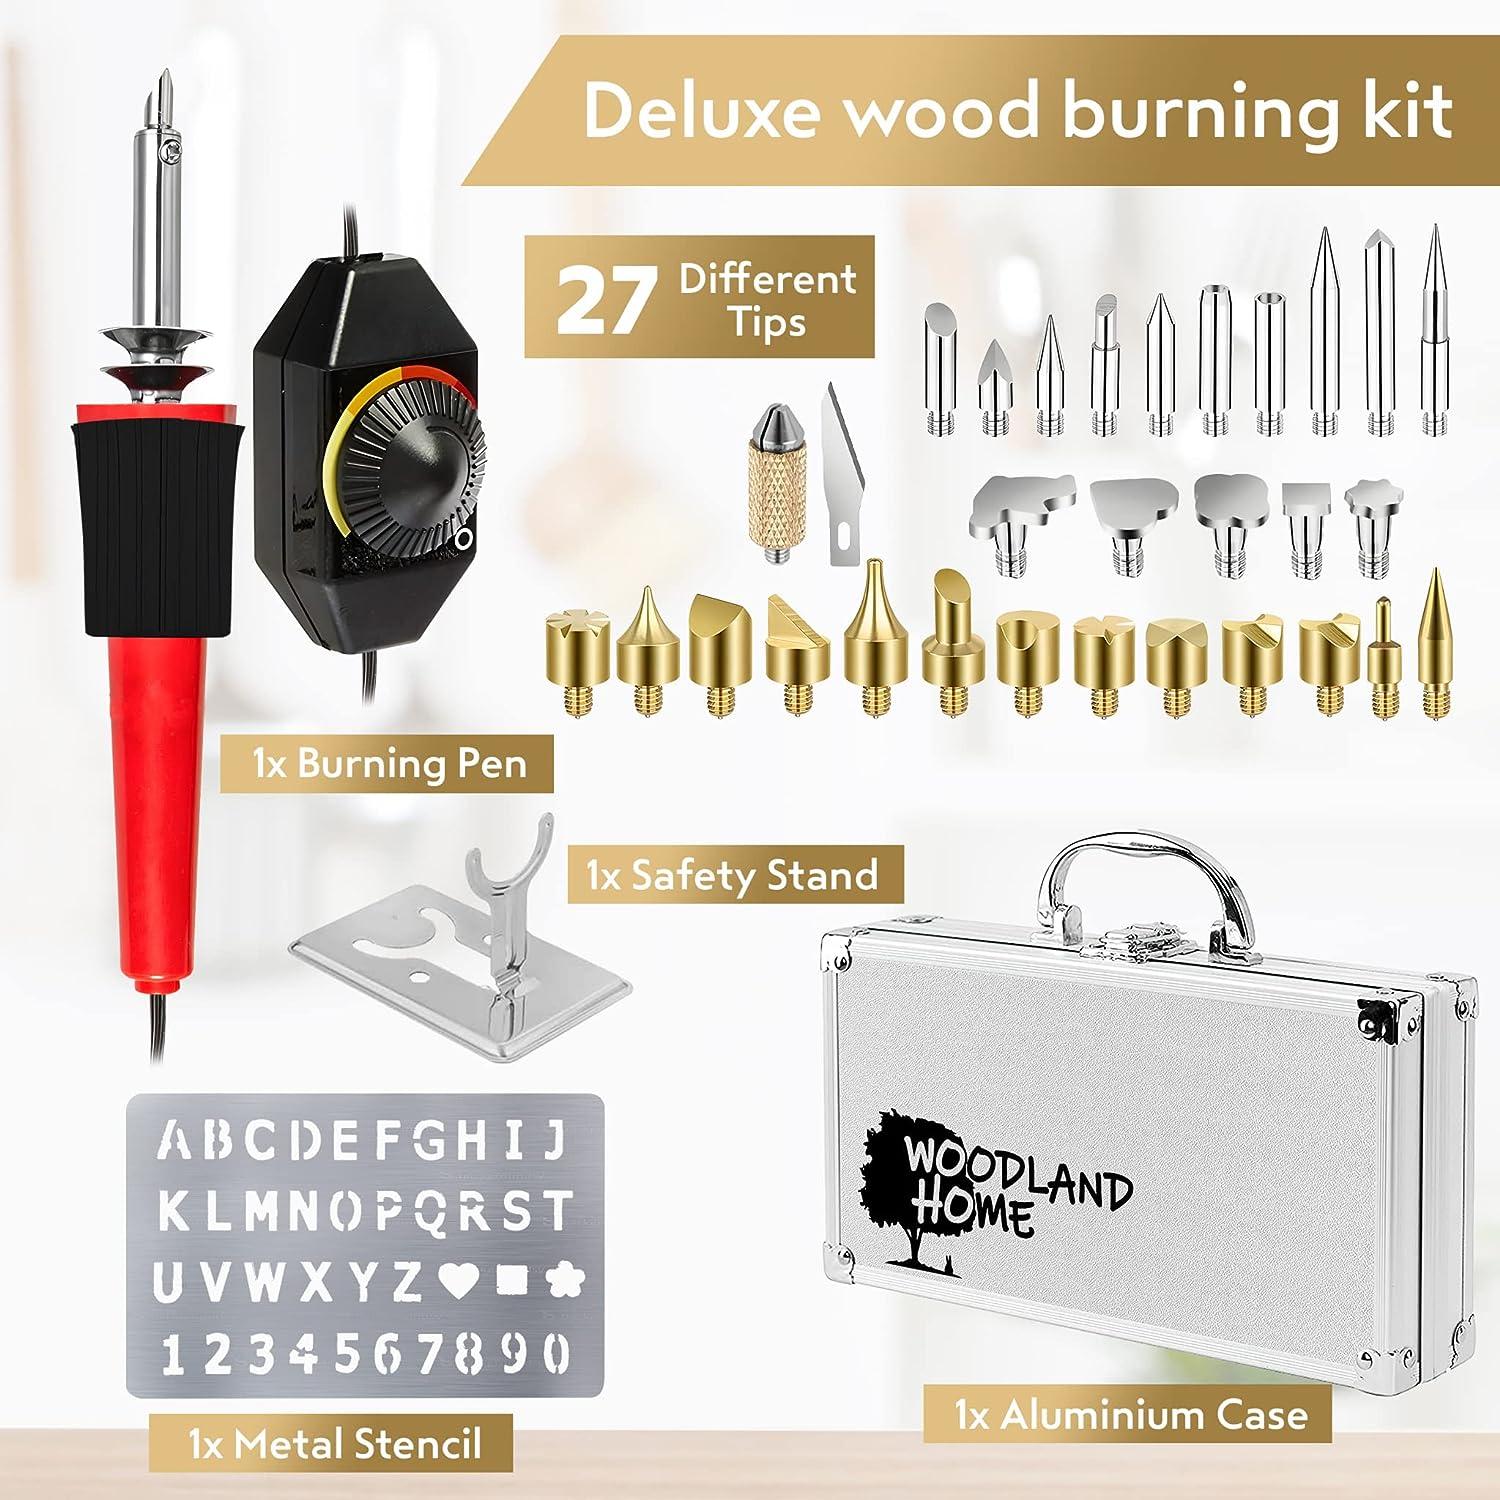 Woodland Home Wood Burning Kit. Pyrography Pen Fully Adjustable Temperature  with Safety Stand. 27 Tips with Cutting Blade, Stencils and Deluxe Case